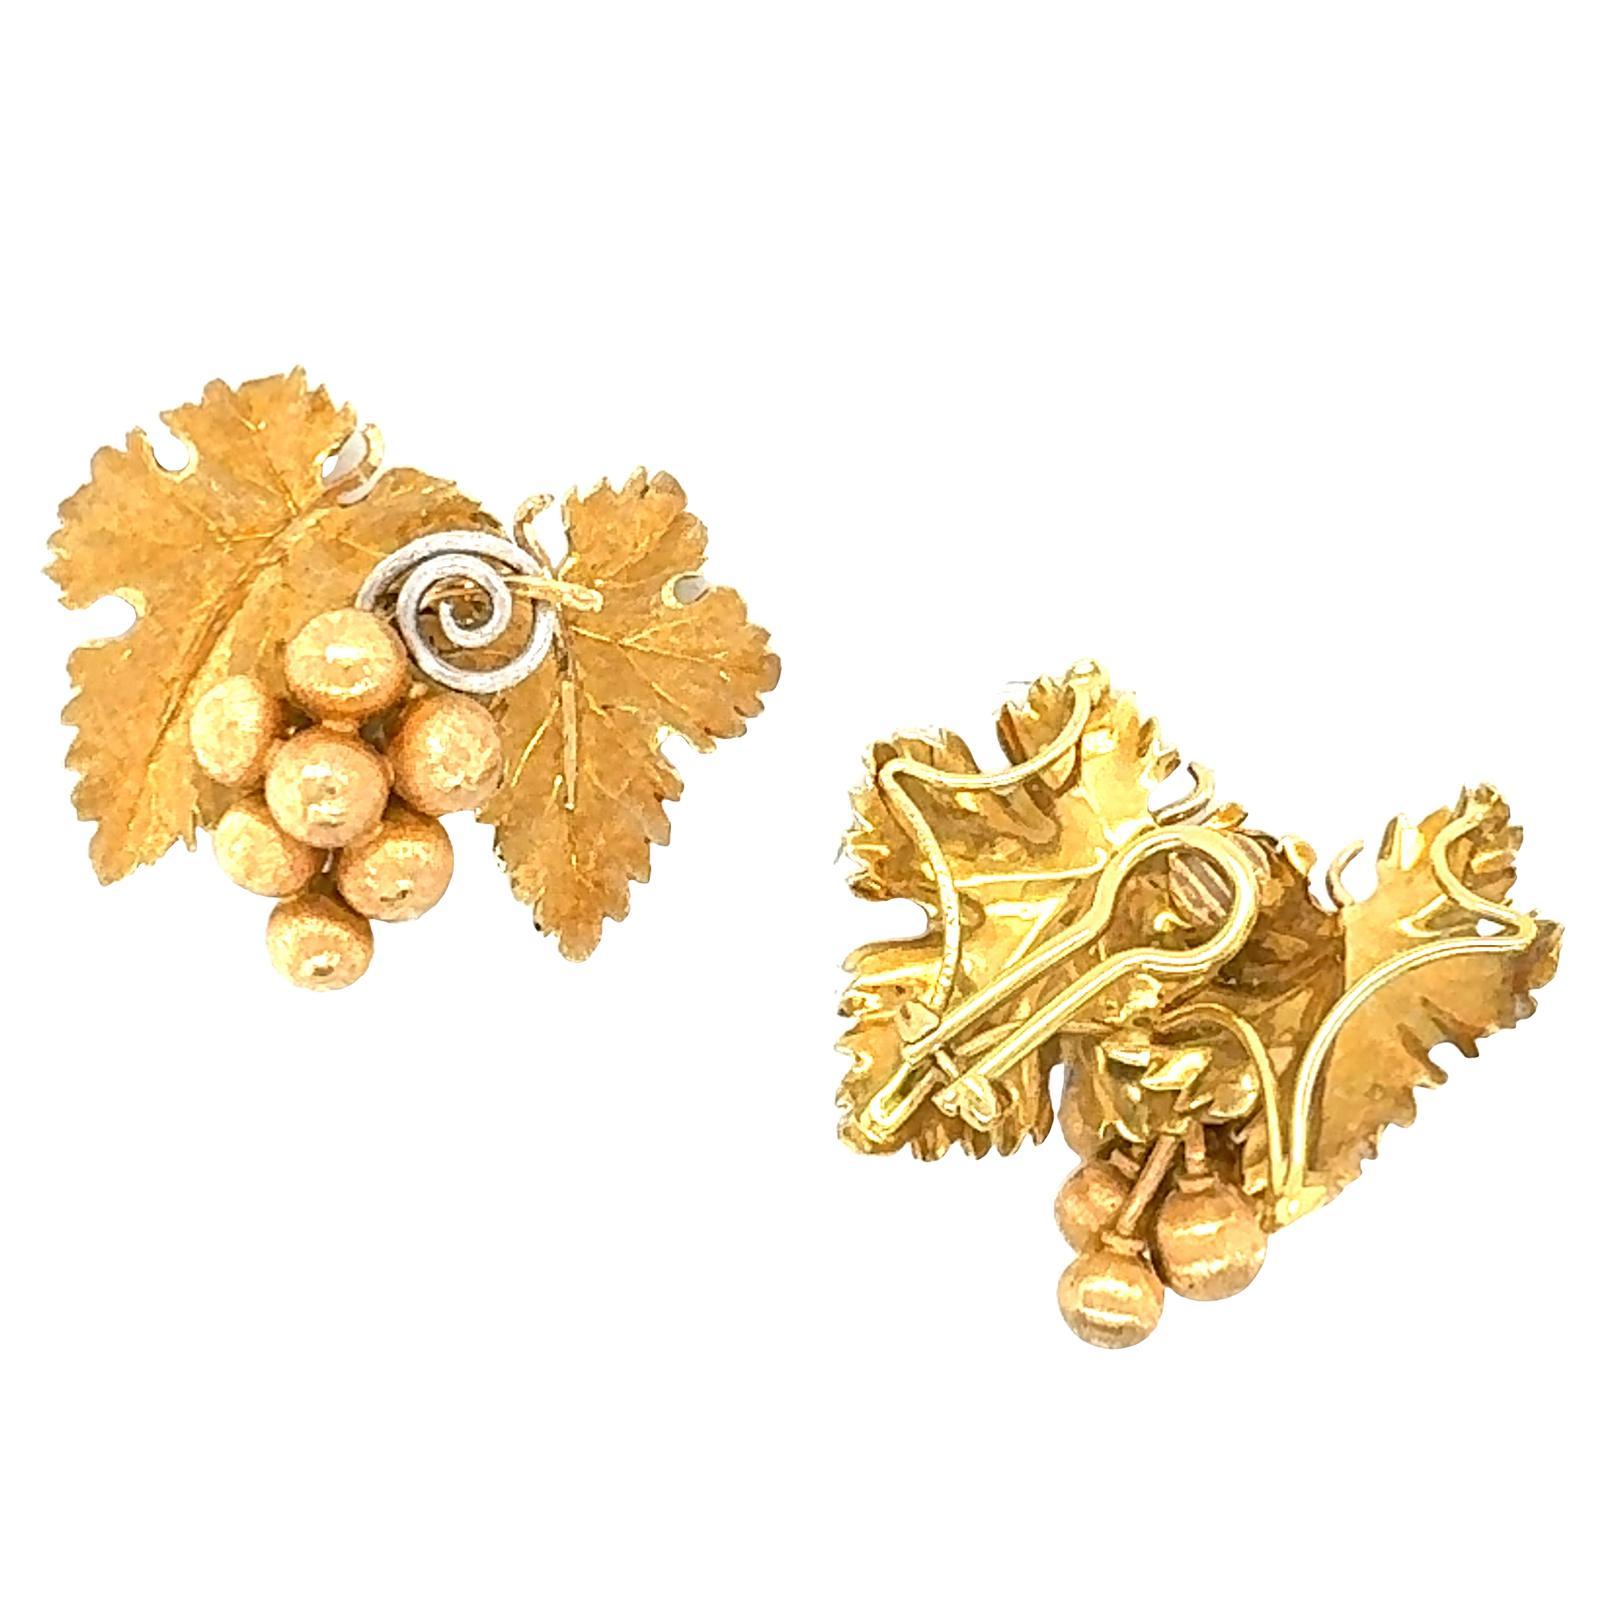 Buccellati Two Tone 18 Karat Gold Grape Leaf Vintage Earclip Earrings In Excellent Condition For Sale In Boca Raton, FL